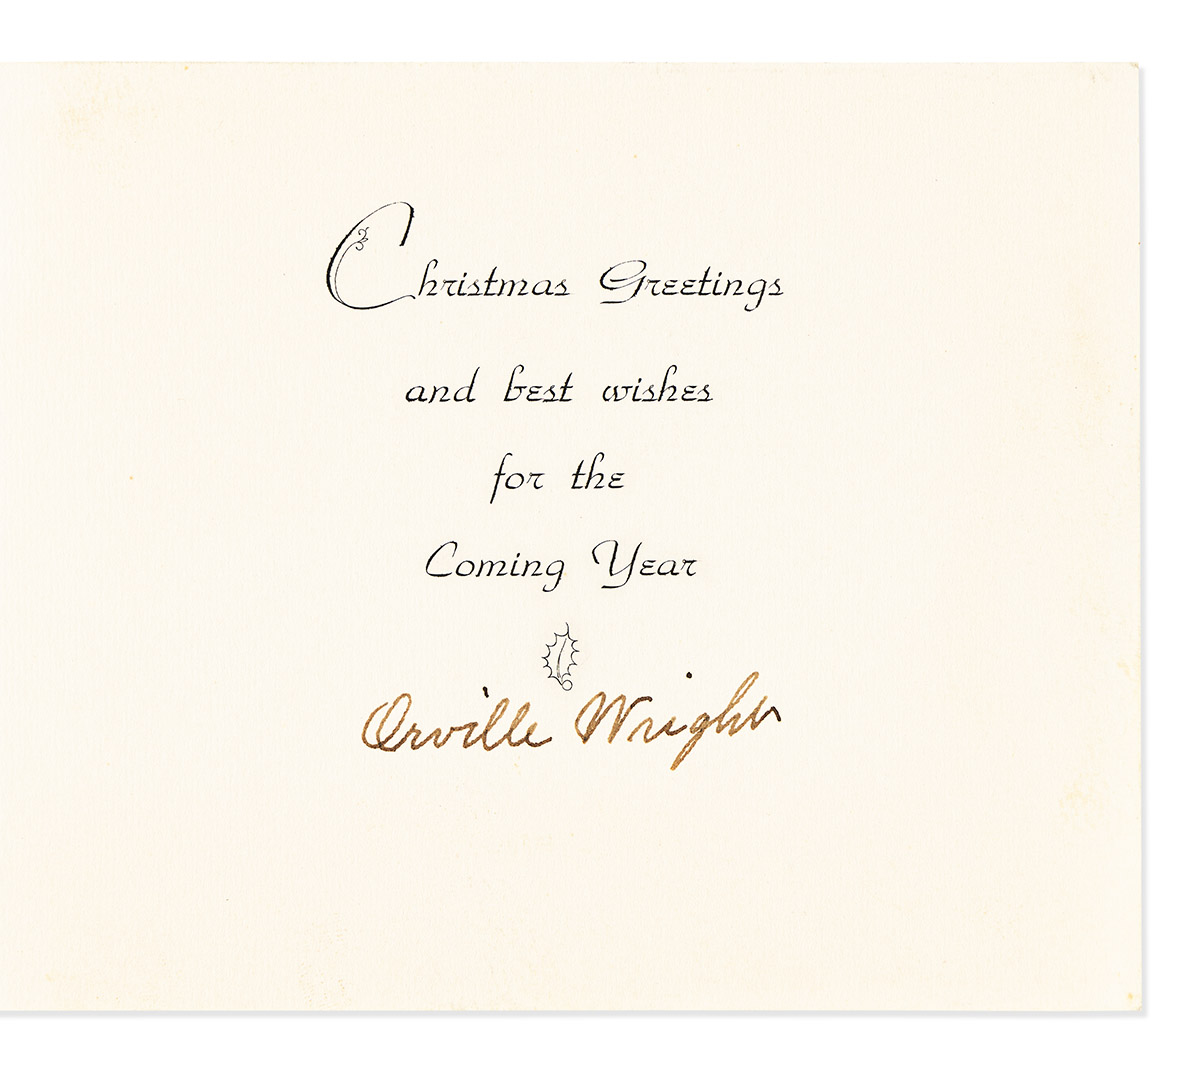 (AVIATORS.) WRIGHT, ORVILLE. Christmas card Signed, featuring photograph showing his Dayton home Hawthorn Hill, on front cover.